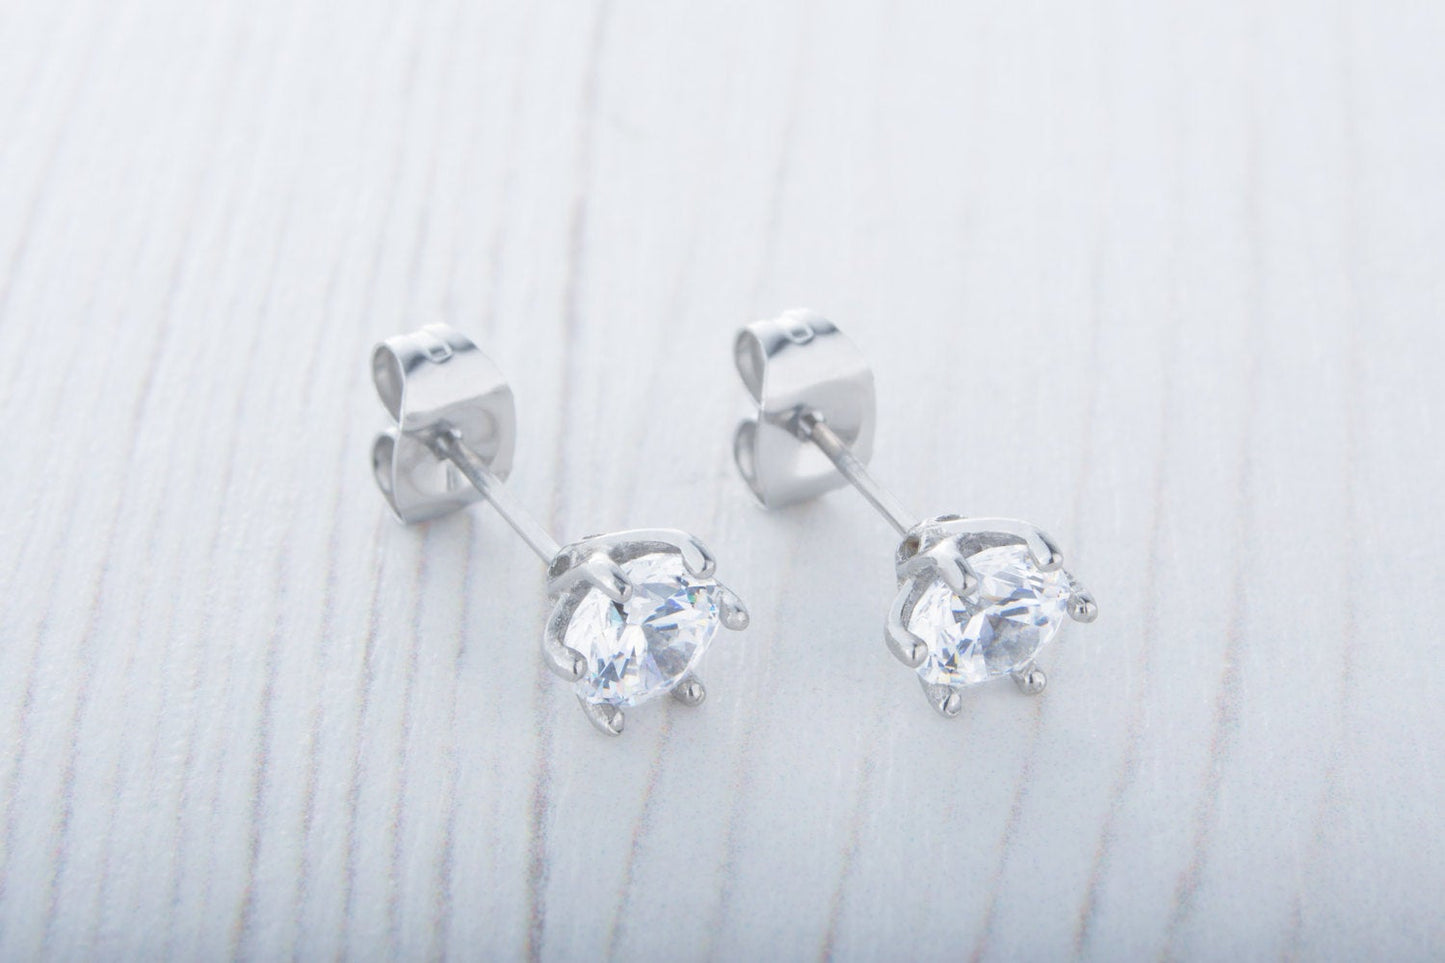 Man Made Diamond Simulant stud earrings, available in titanium, white gold and surgical steel 4mm, 5mm or 6mm sizes